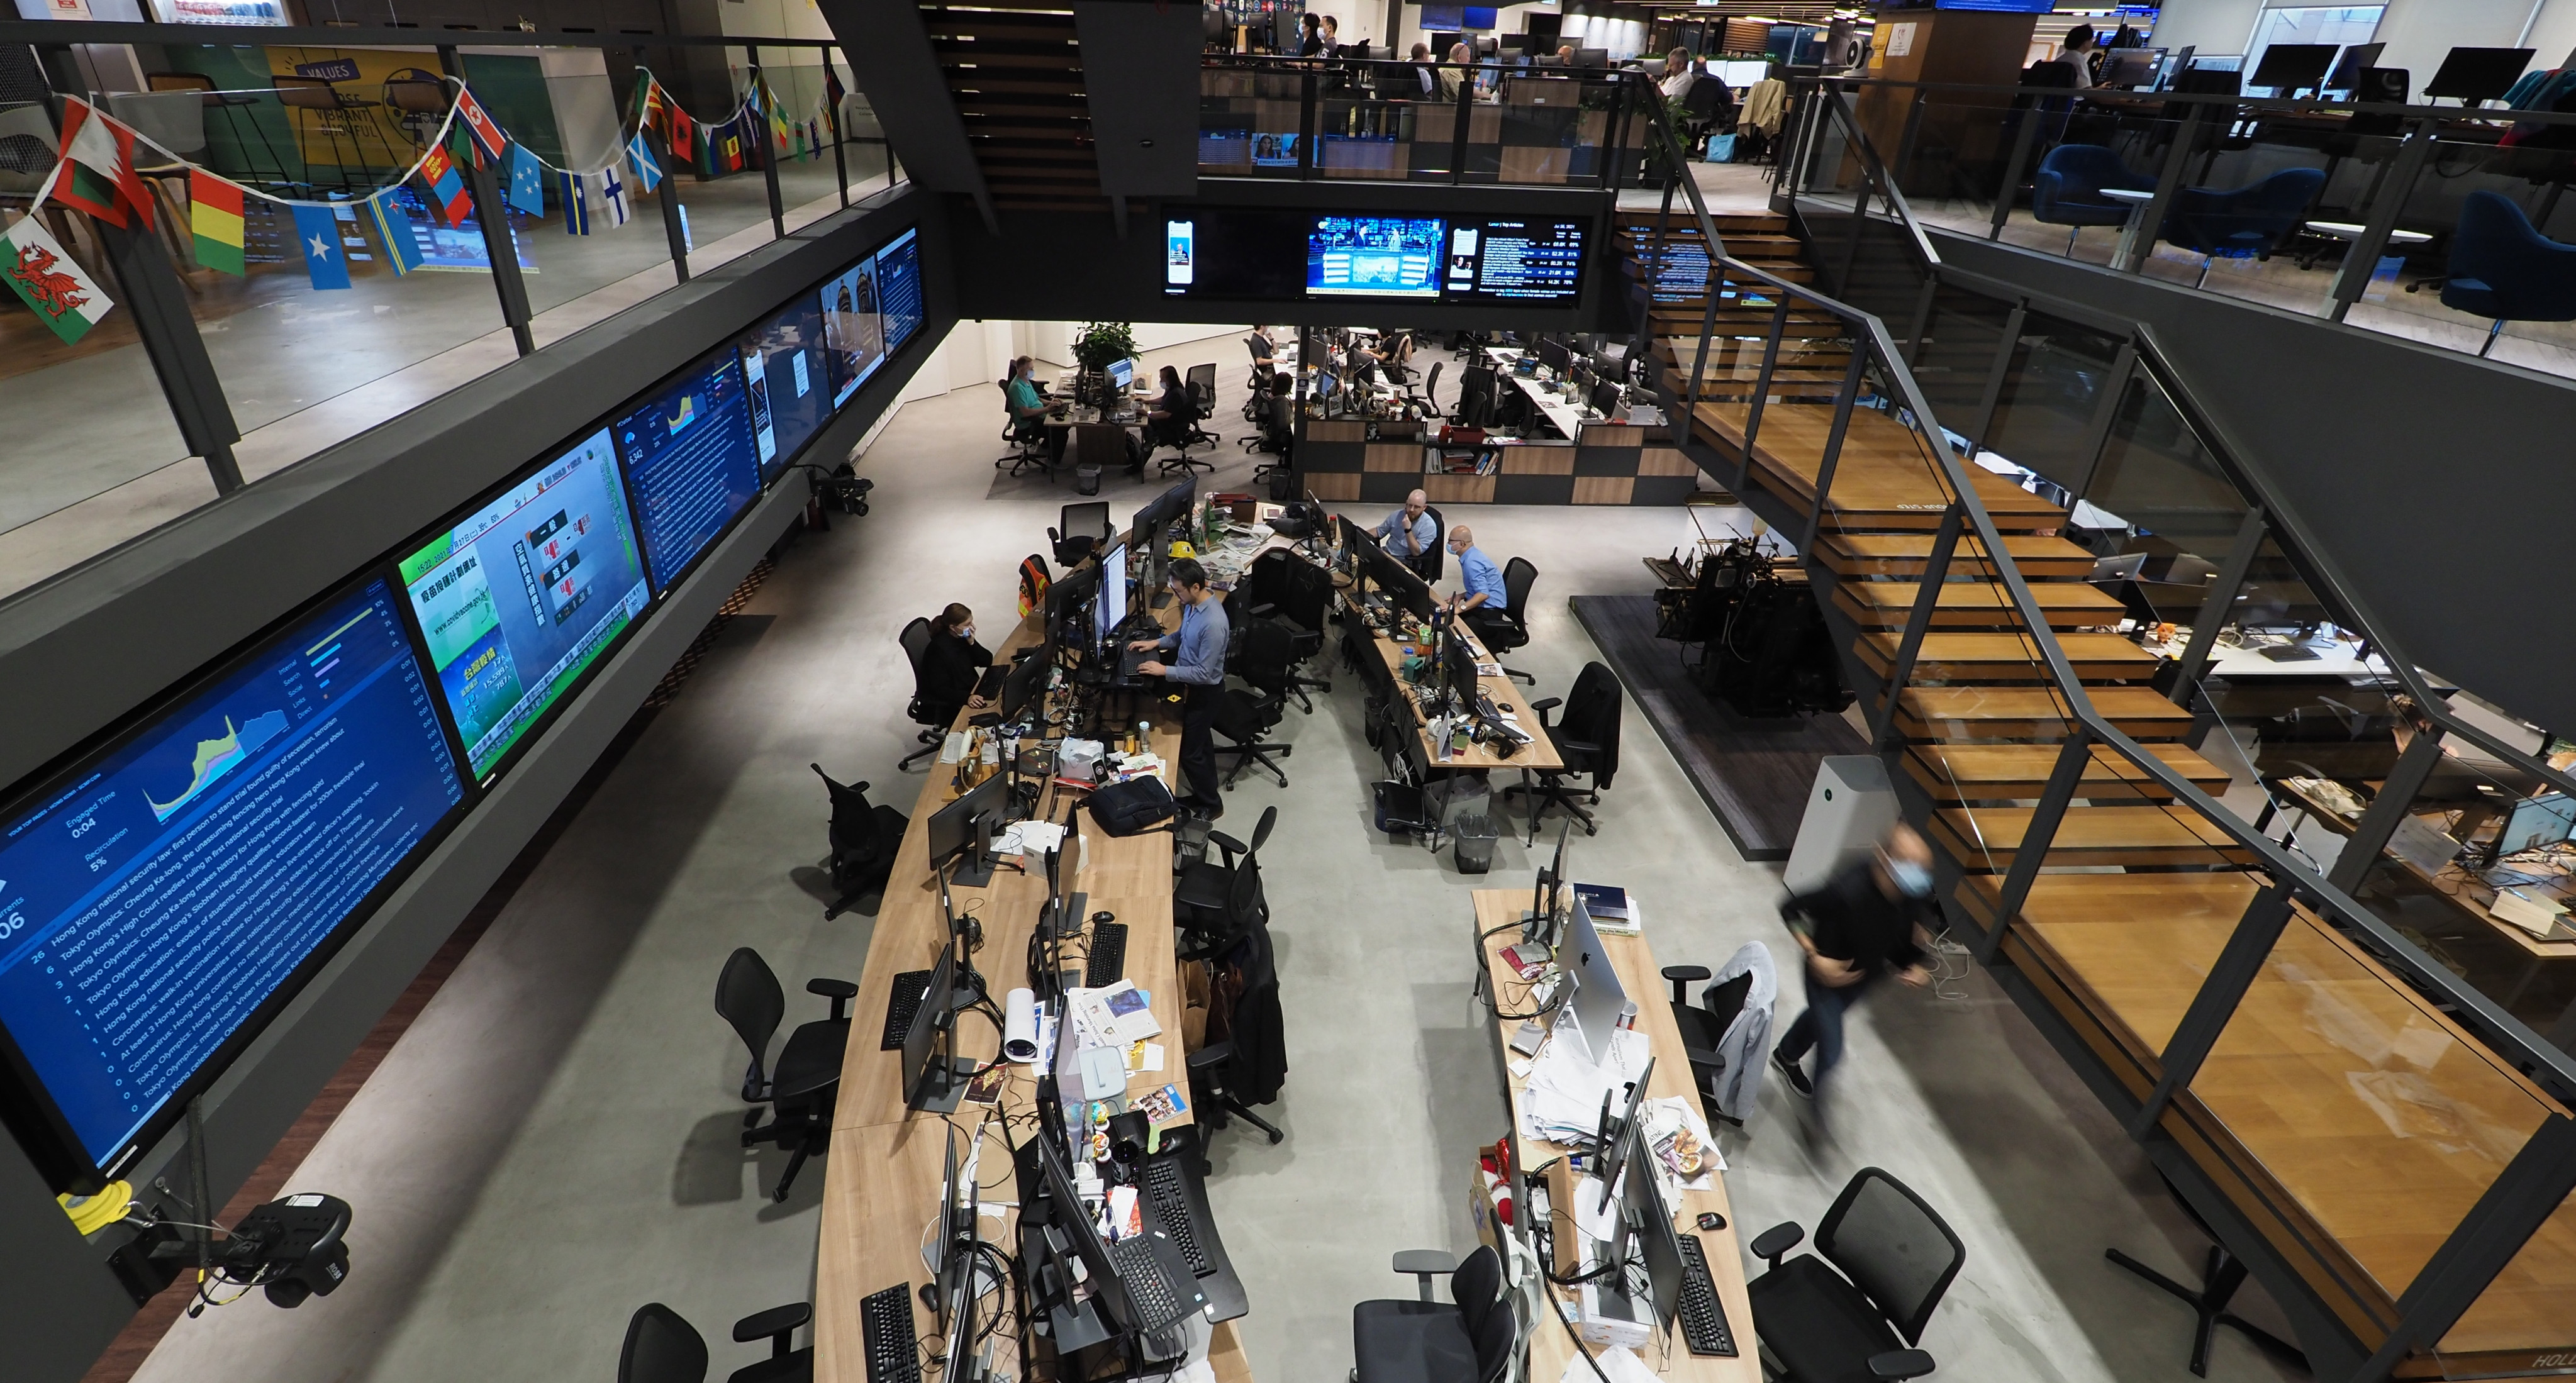 The Post’s newsroom in Causeway Bay, where the series was produced. Photo: Martin Chan